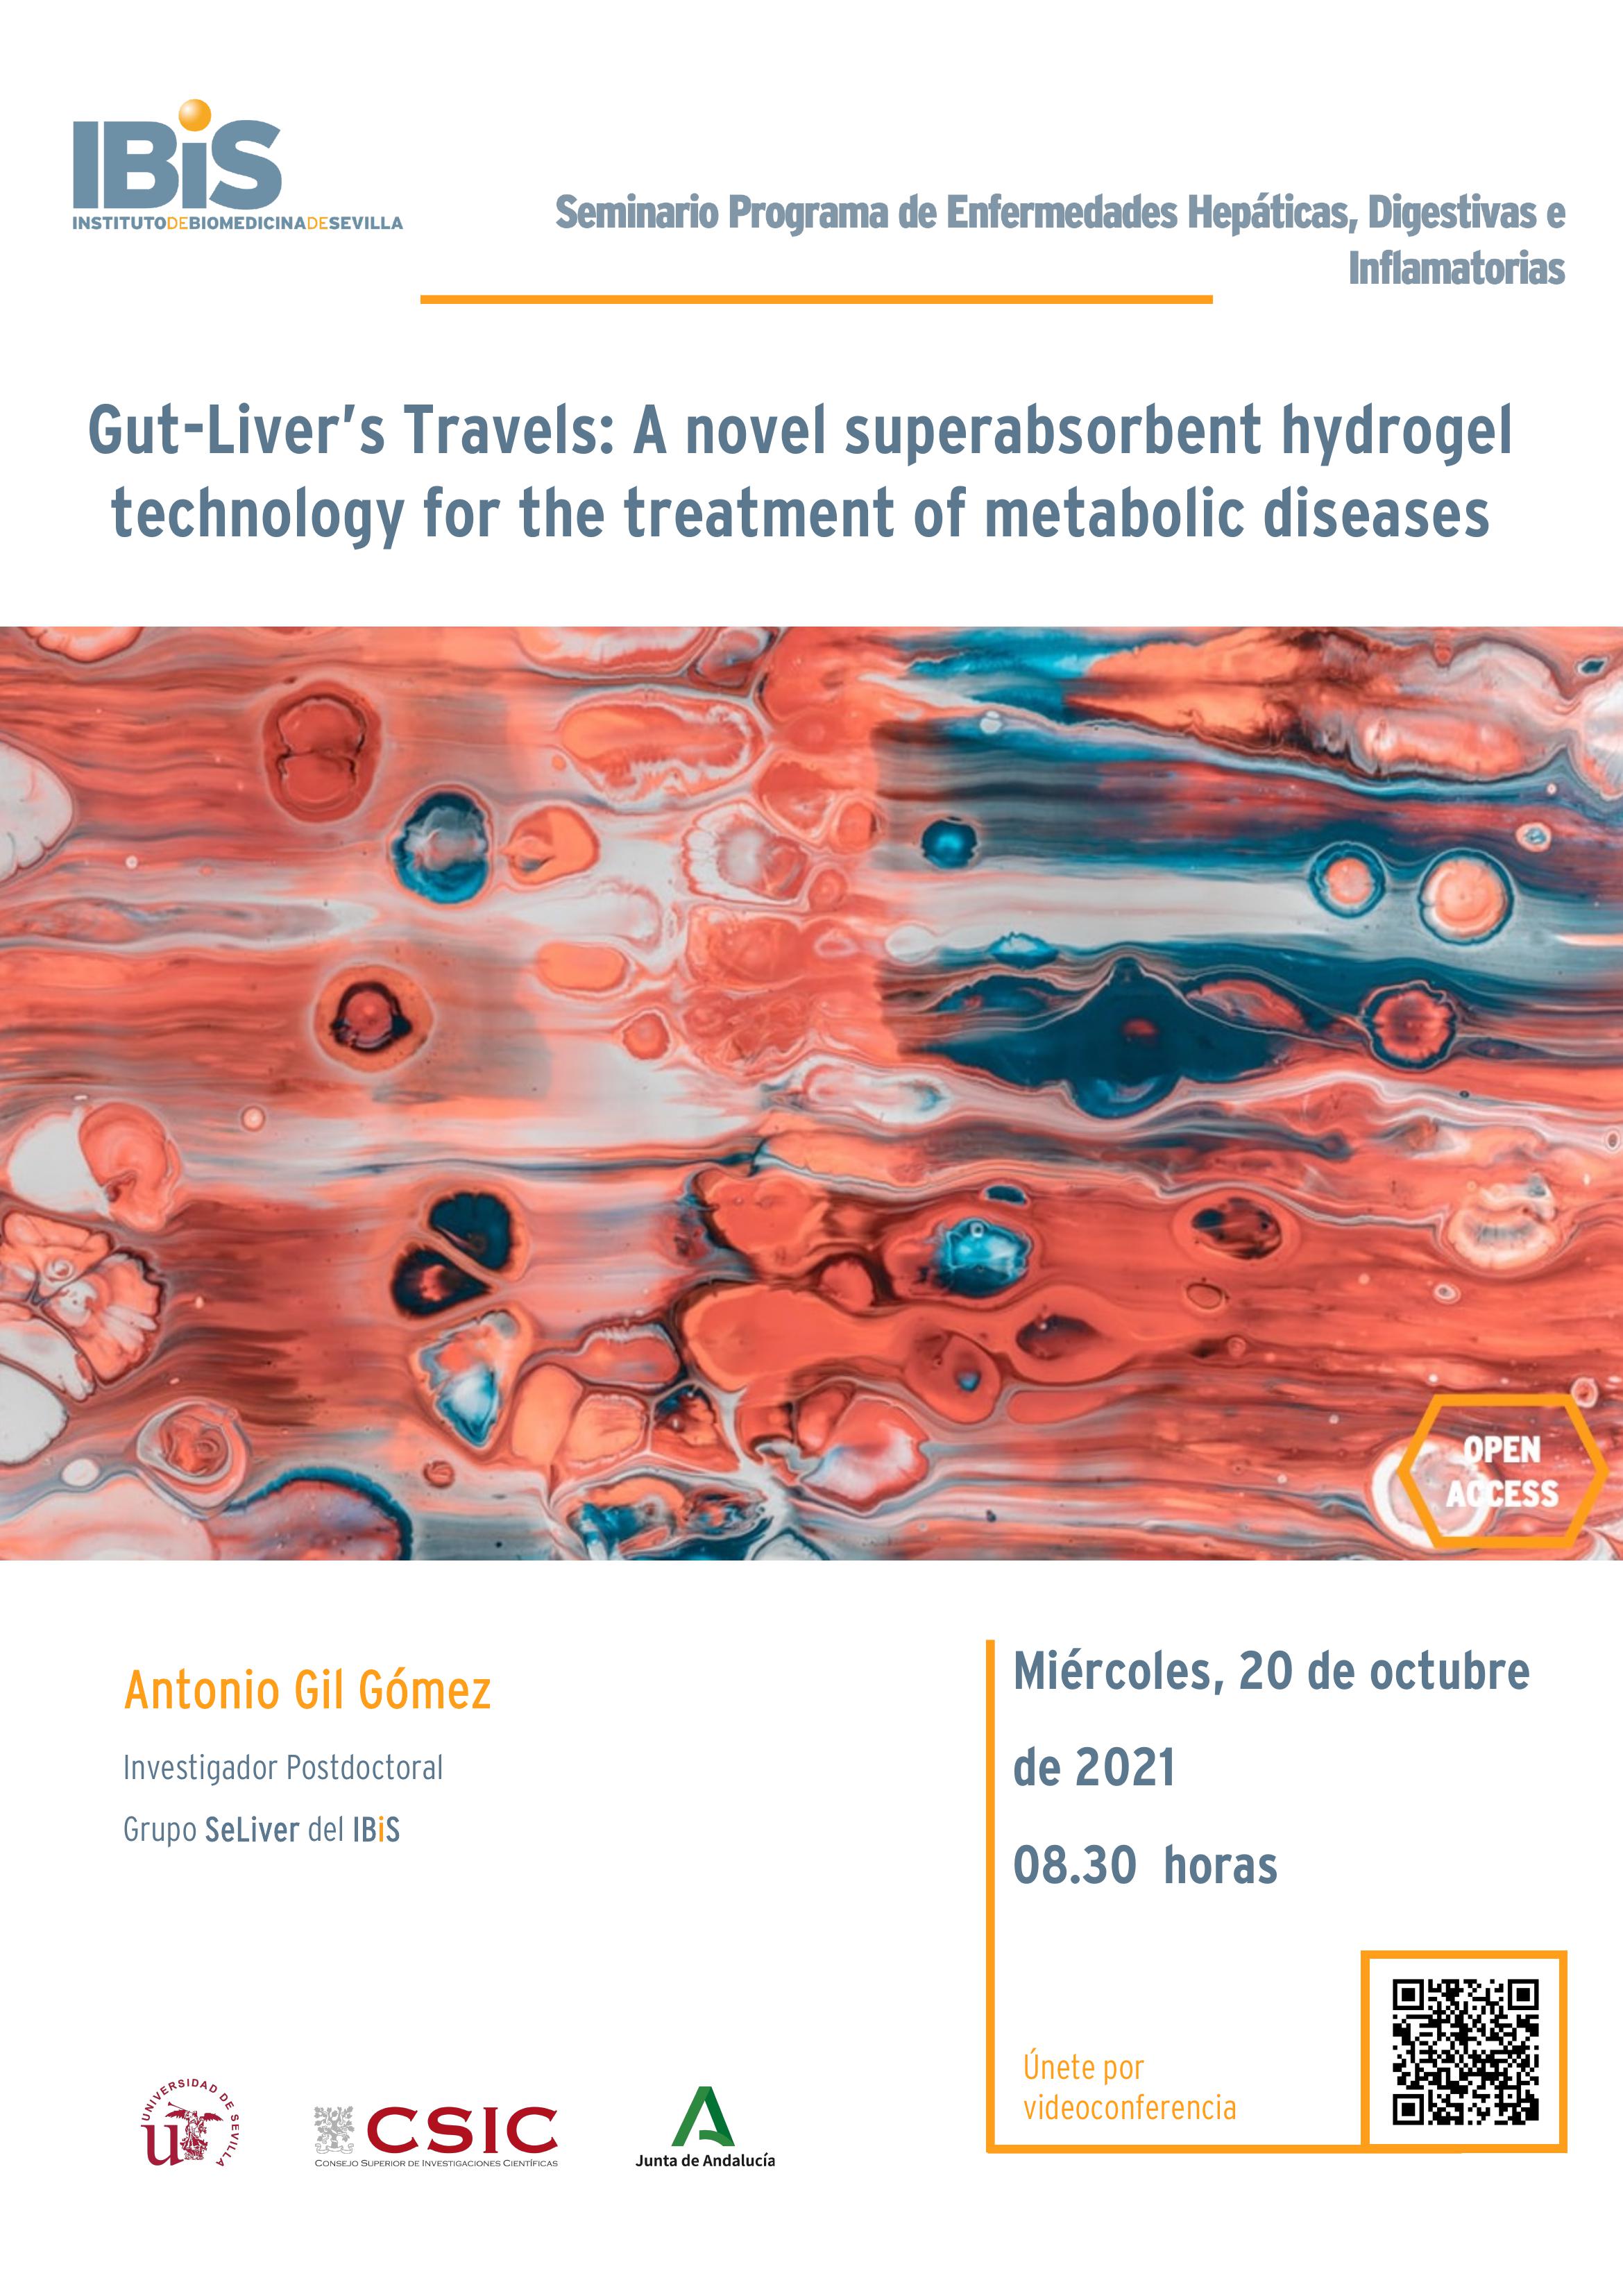 Poster: Gut-Liver’s Travels: A novel superabsorbent hydrogel technology for the treatment of metabolic diseases